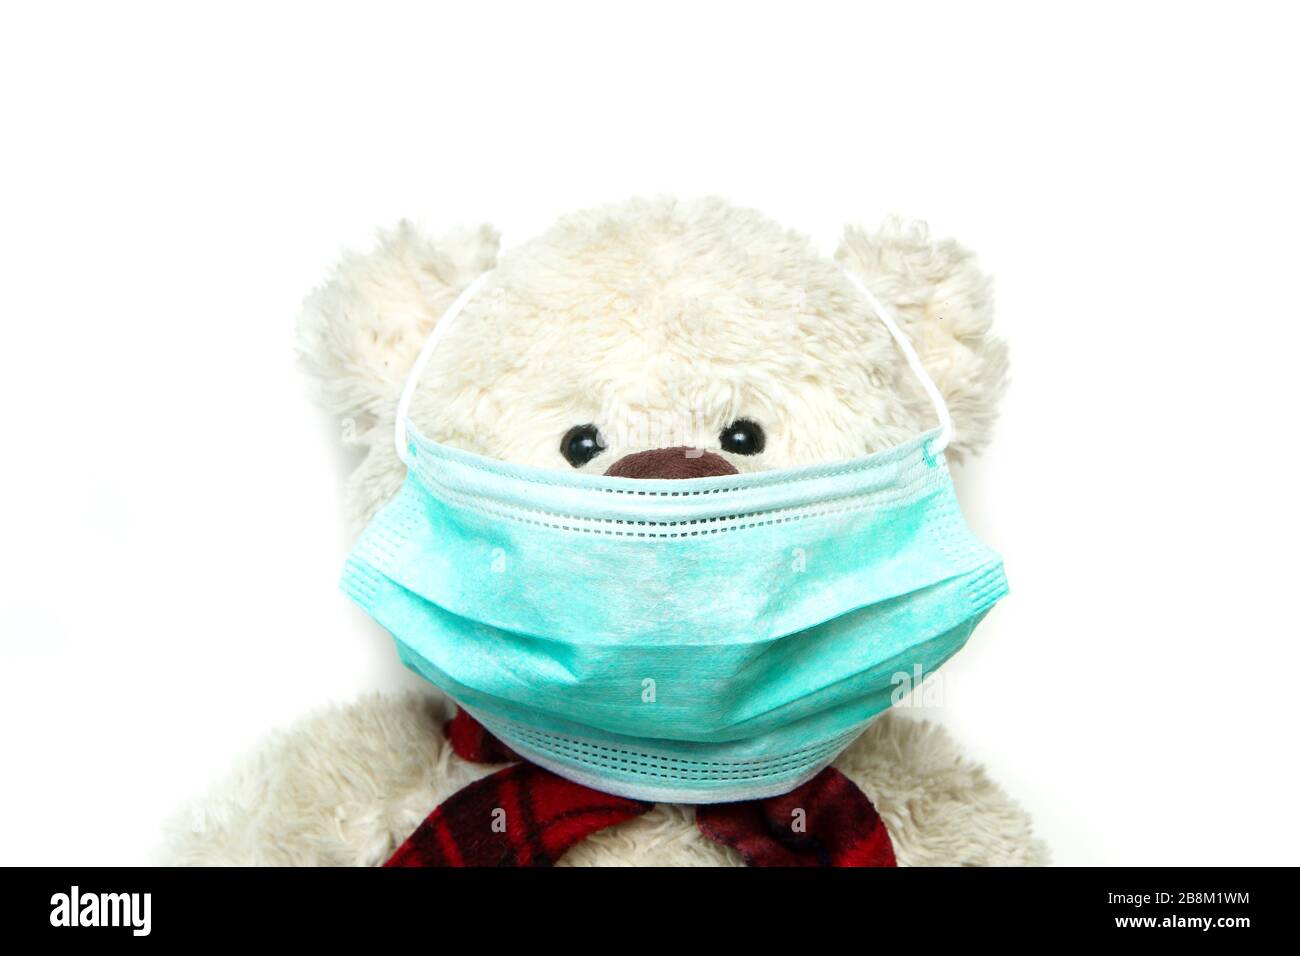 The plush teddy with a mask on his face. as a symbol of protection against viruses like corona virus. Everybody has to wear a mask. Stock Photo